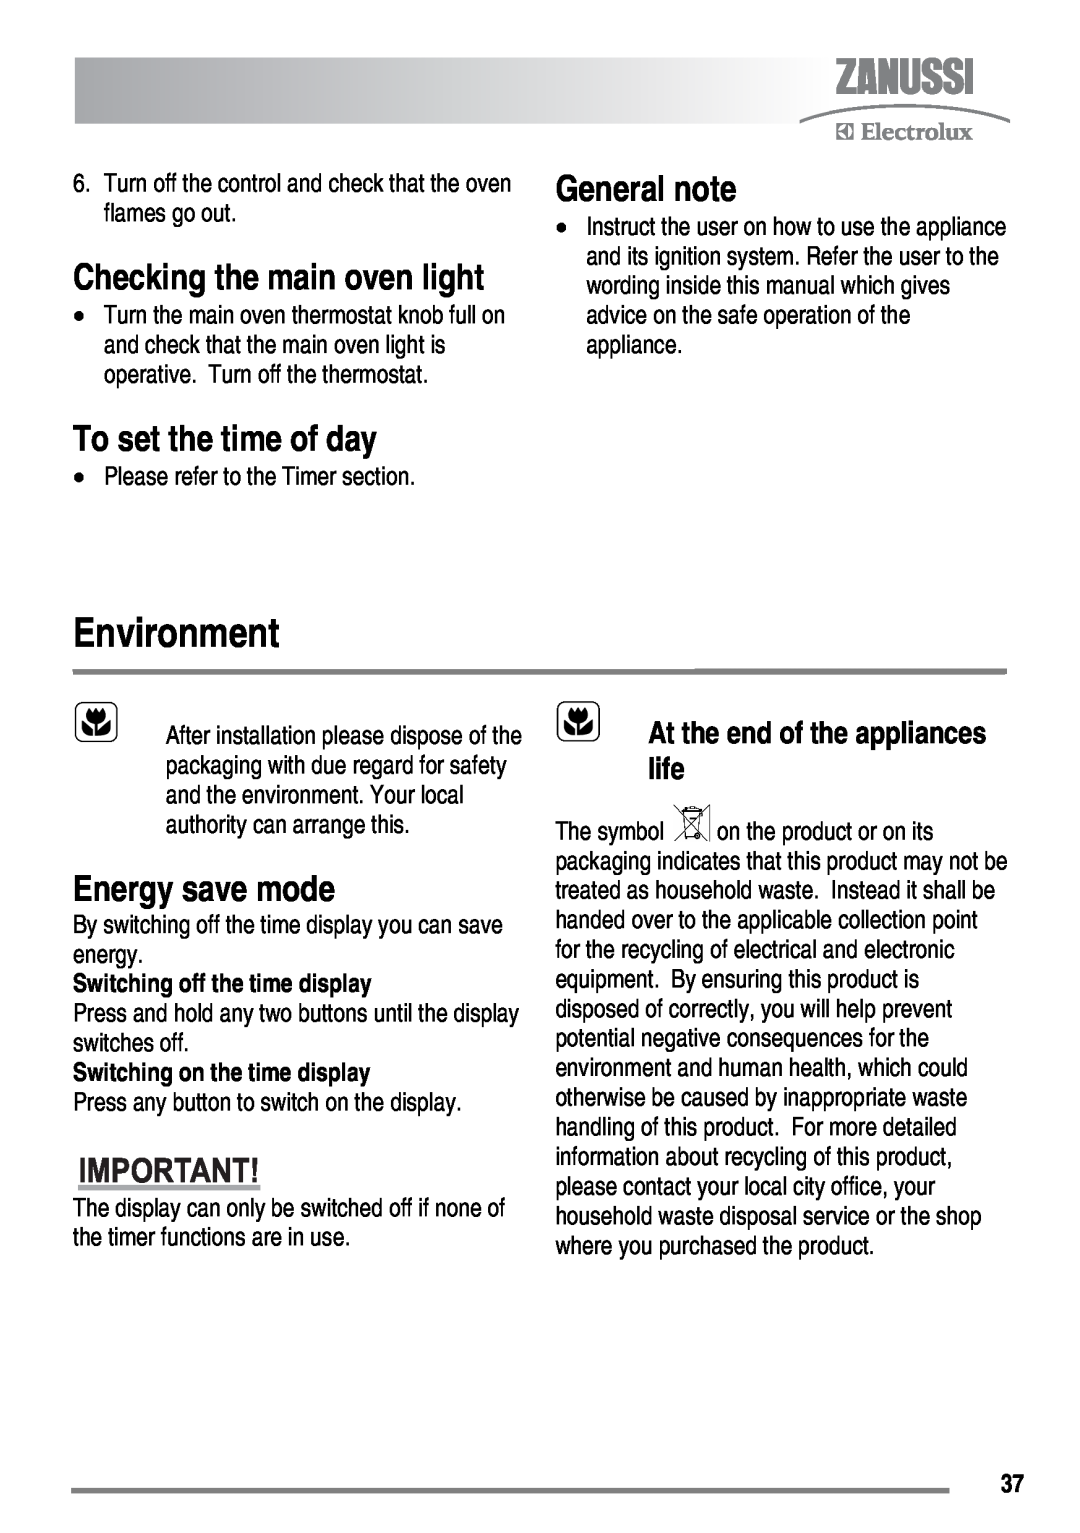 Zanussi ZKG6020 Environment, General note, Energy save mode, Checking the main oven light, Switching off the time display 